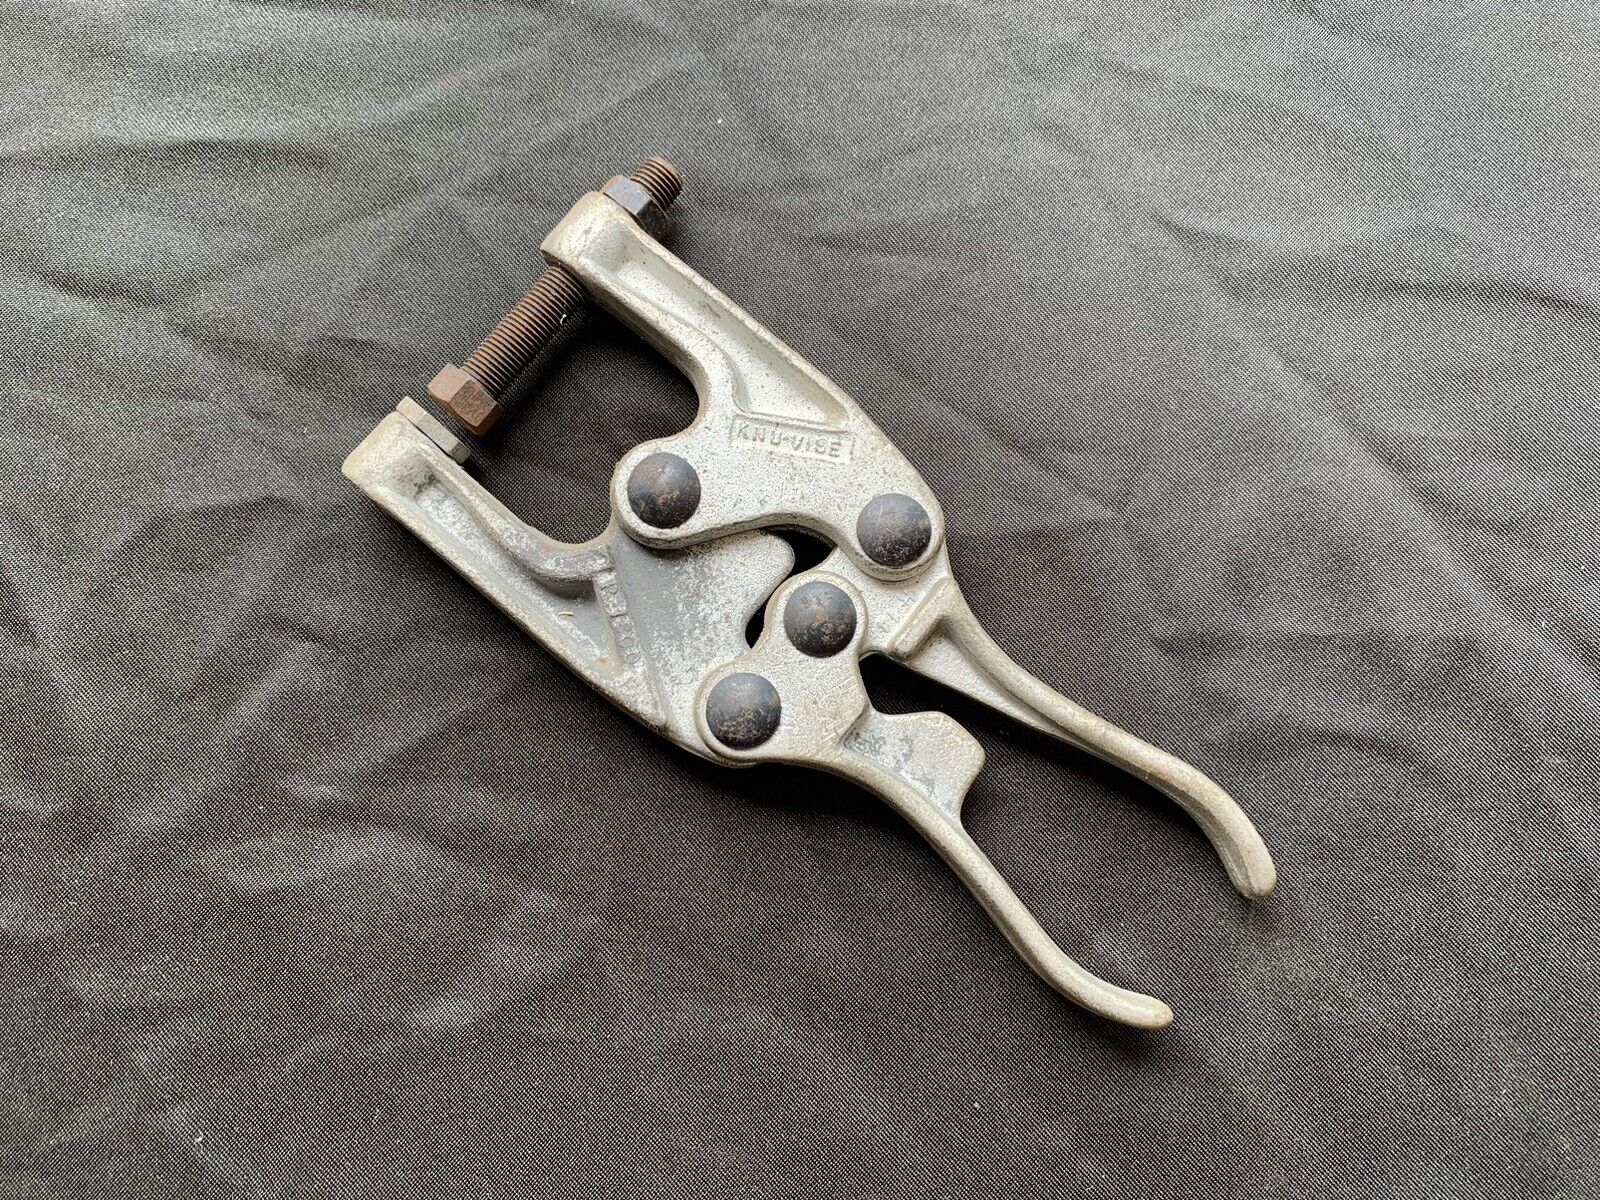 Vintage OEM Knu Vise Made In USA P-1800 Clamp Welding Locking Hand Bolt Pliers